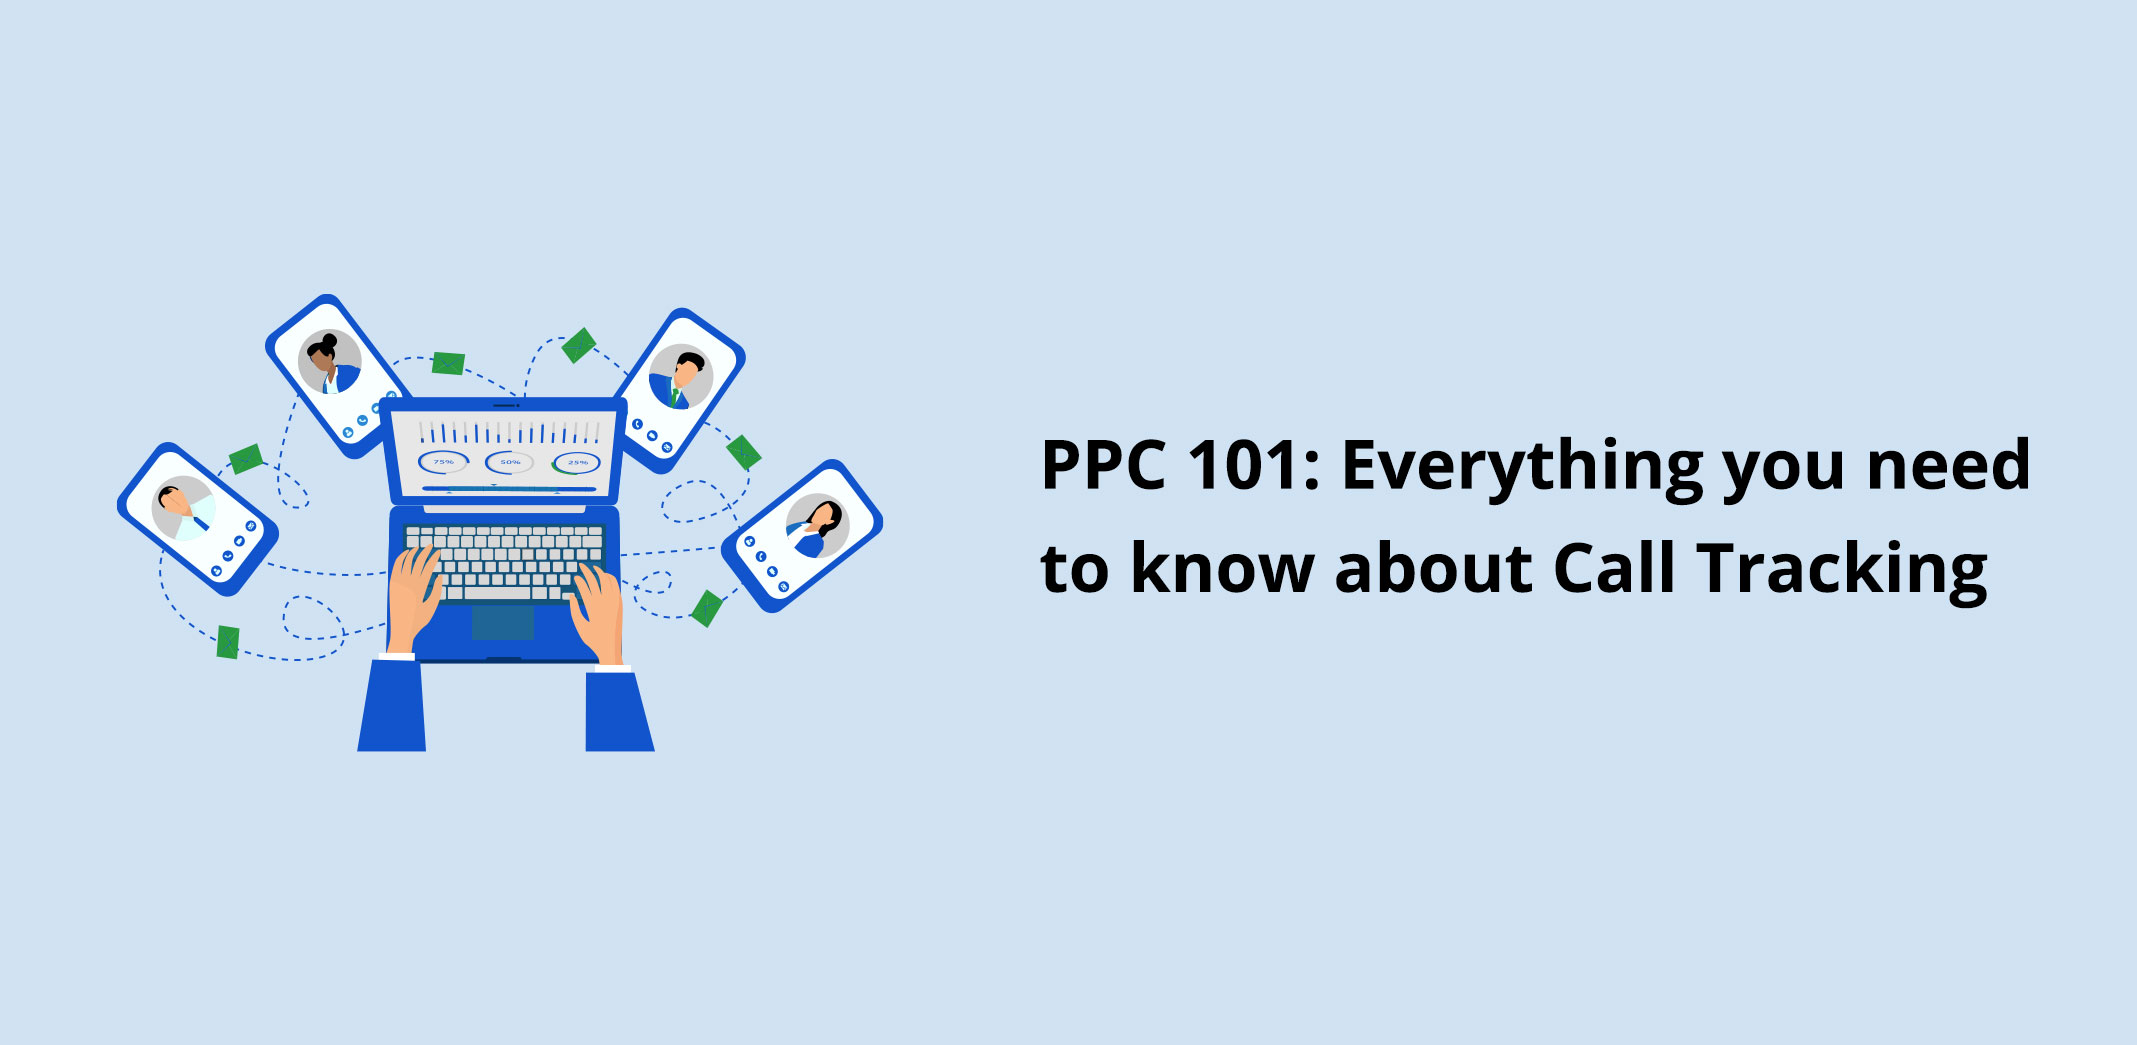 PPC 101: Everything you need to know about Call Tracking